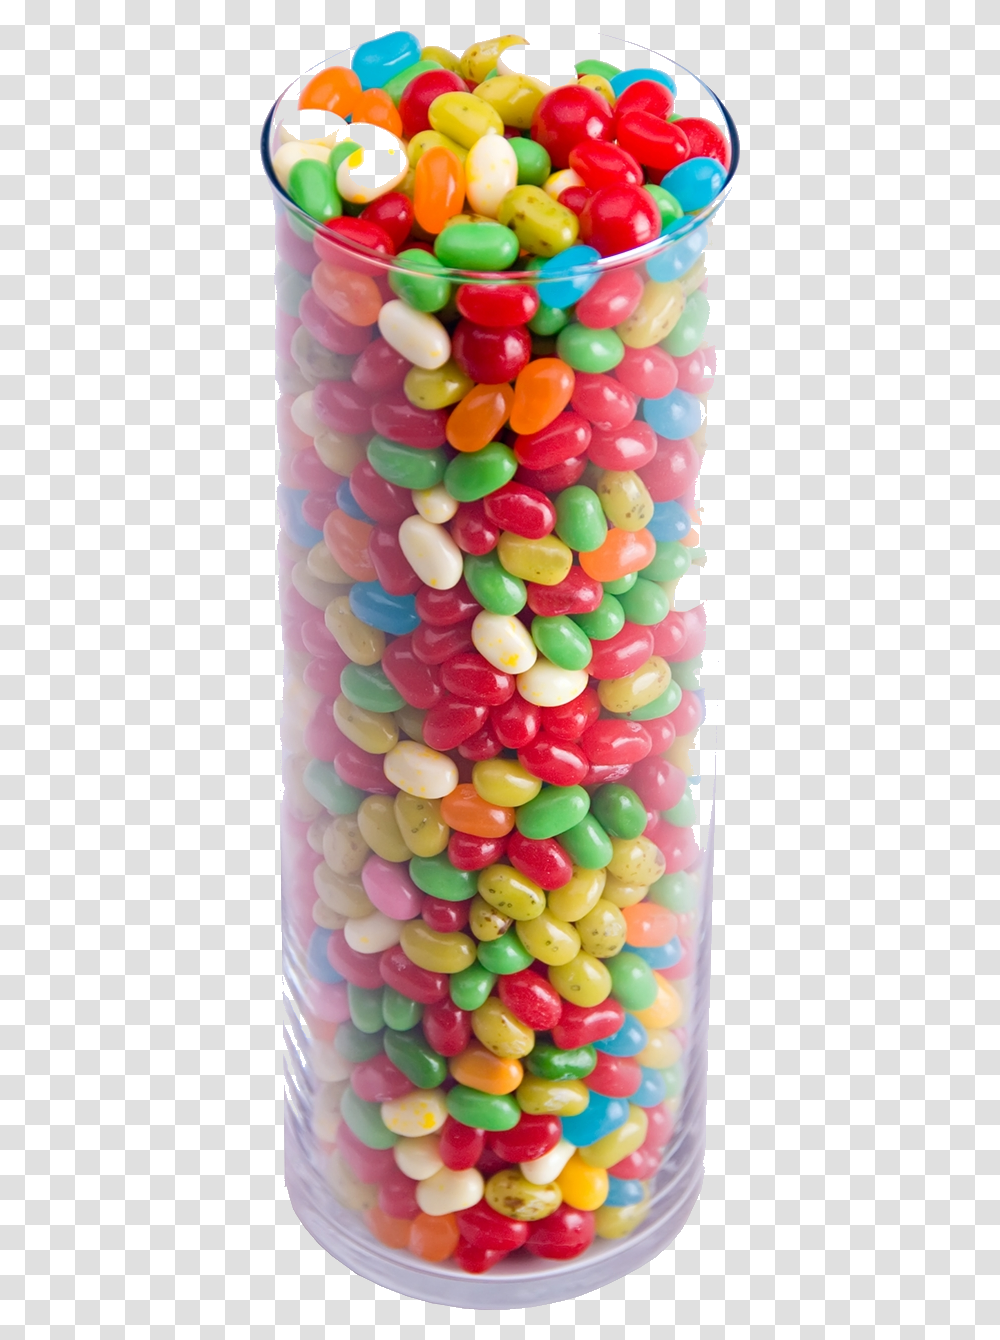 Jar Of Candy Clipart Sprinkle Many Sweets In Hd Many Sweets In The Jar, Food, Confectionery, Birthday Cake, Dessert Transparent Png